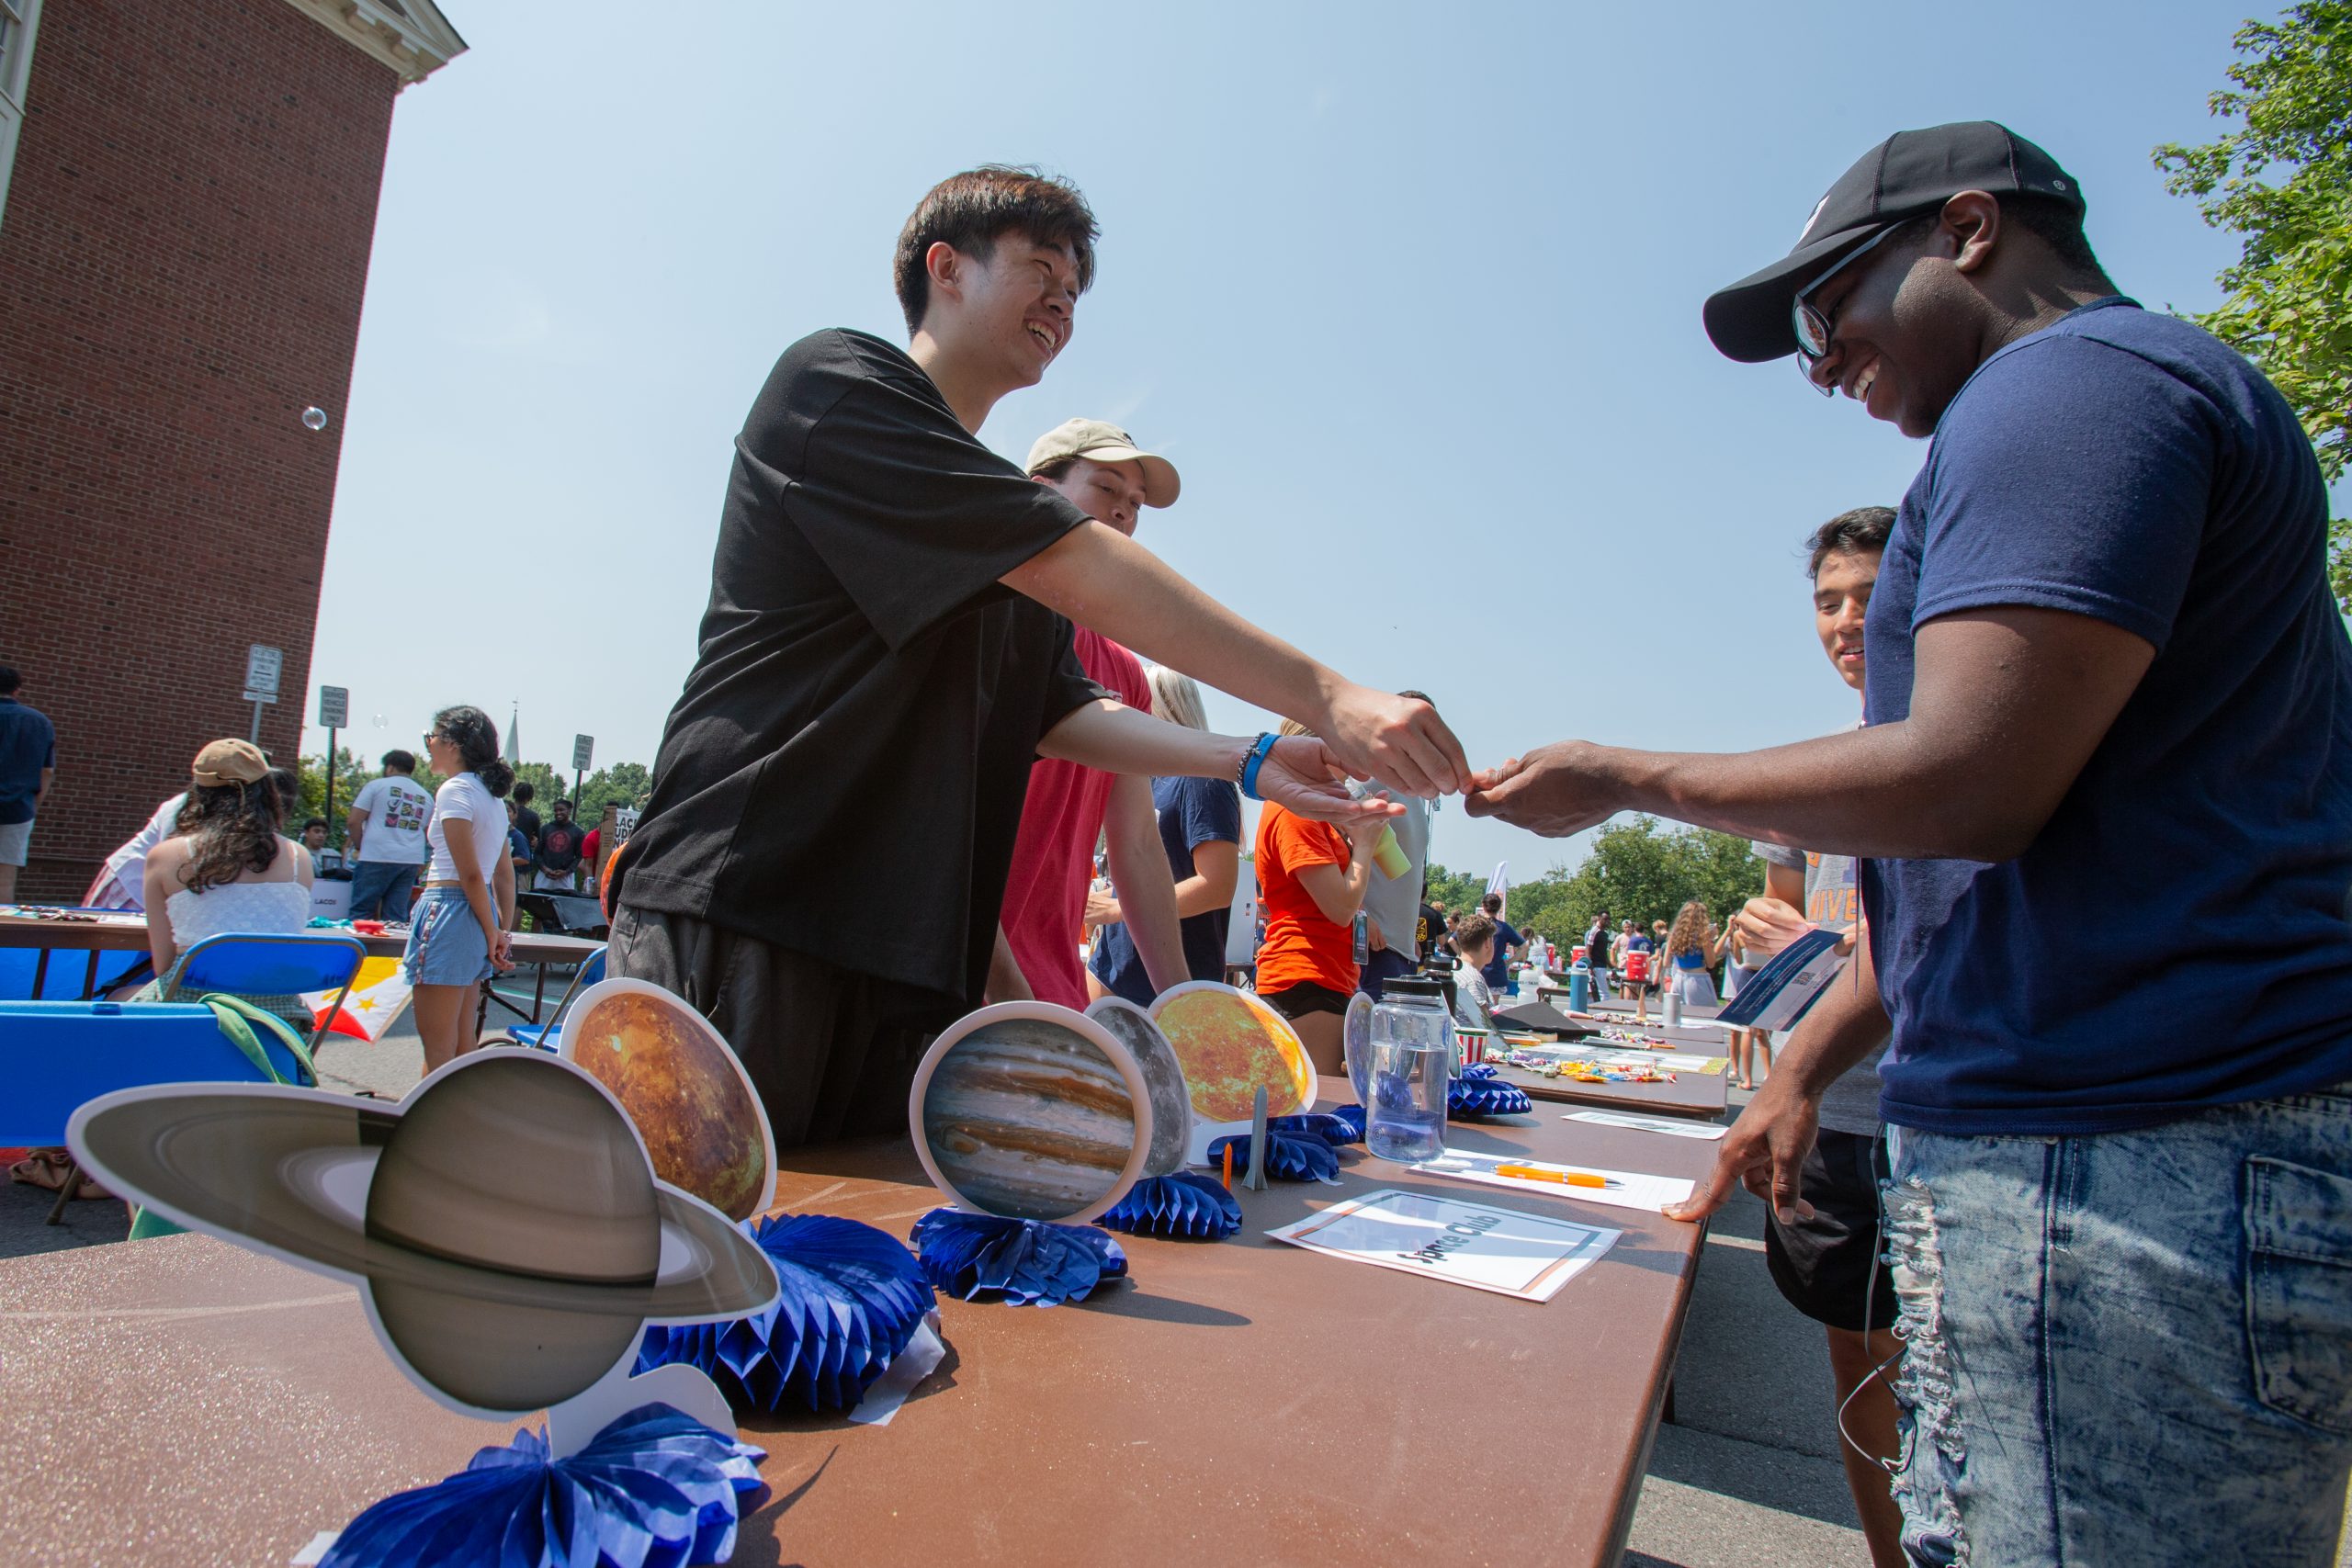 A male student passes a piece of paper to another male student over a table outdoors at the Activities Unlimited fair. There are paper cut outs of planets on the table.